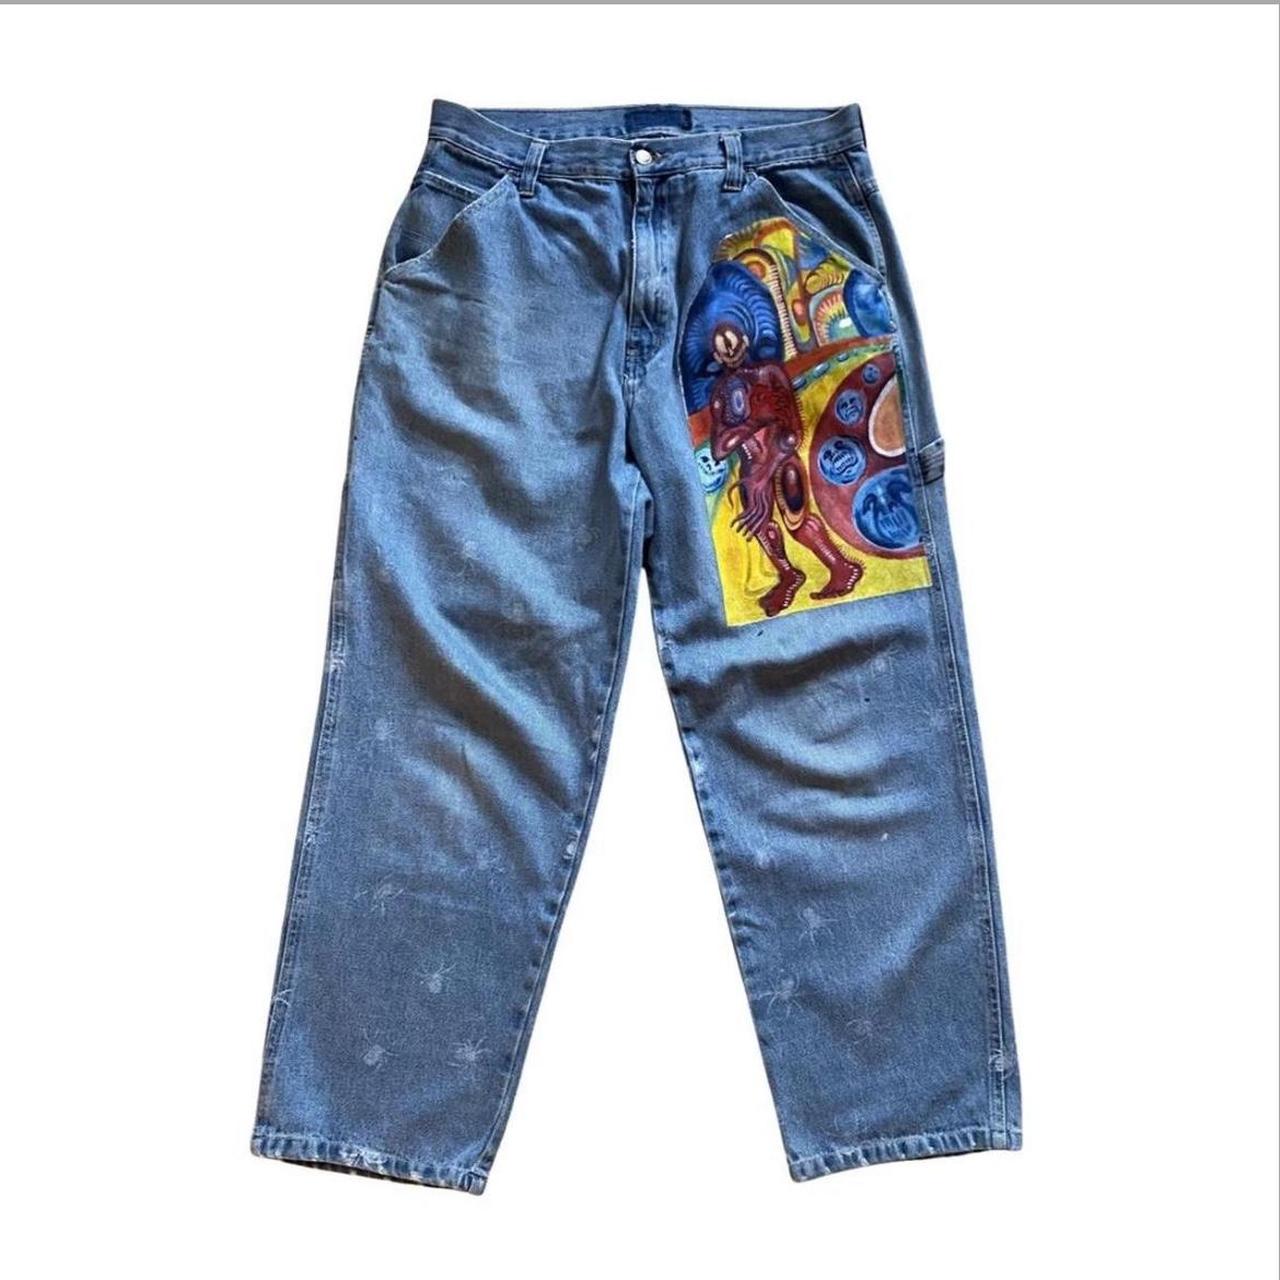 custom jeans painted all by hand - Depop